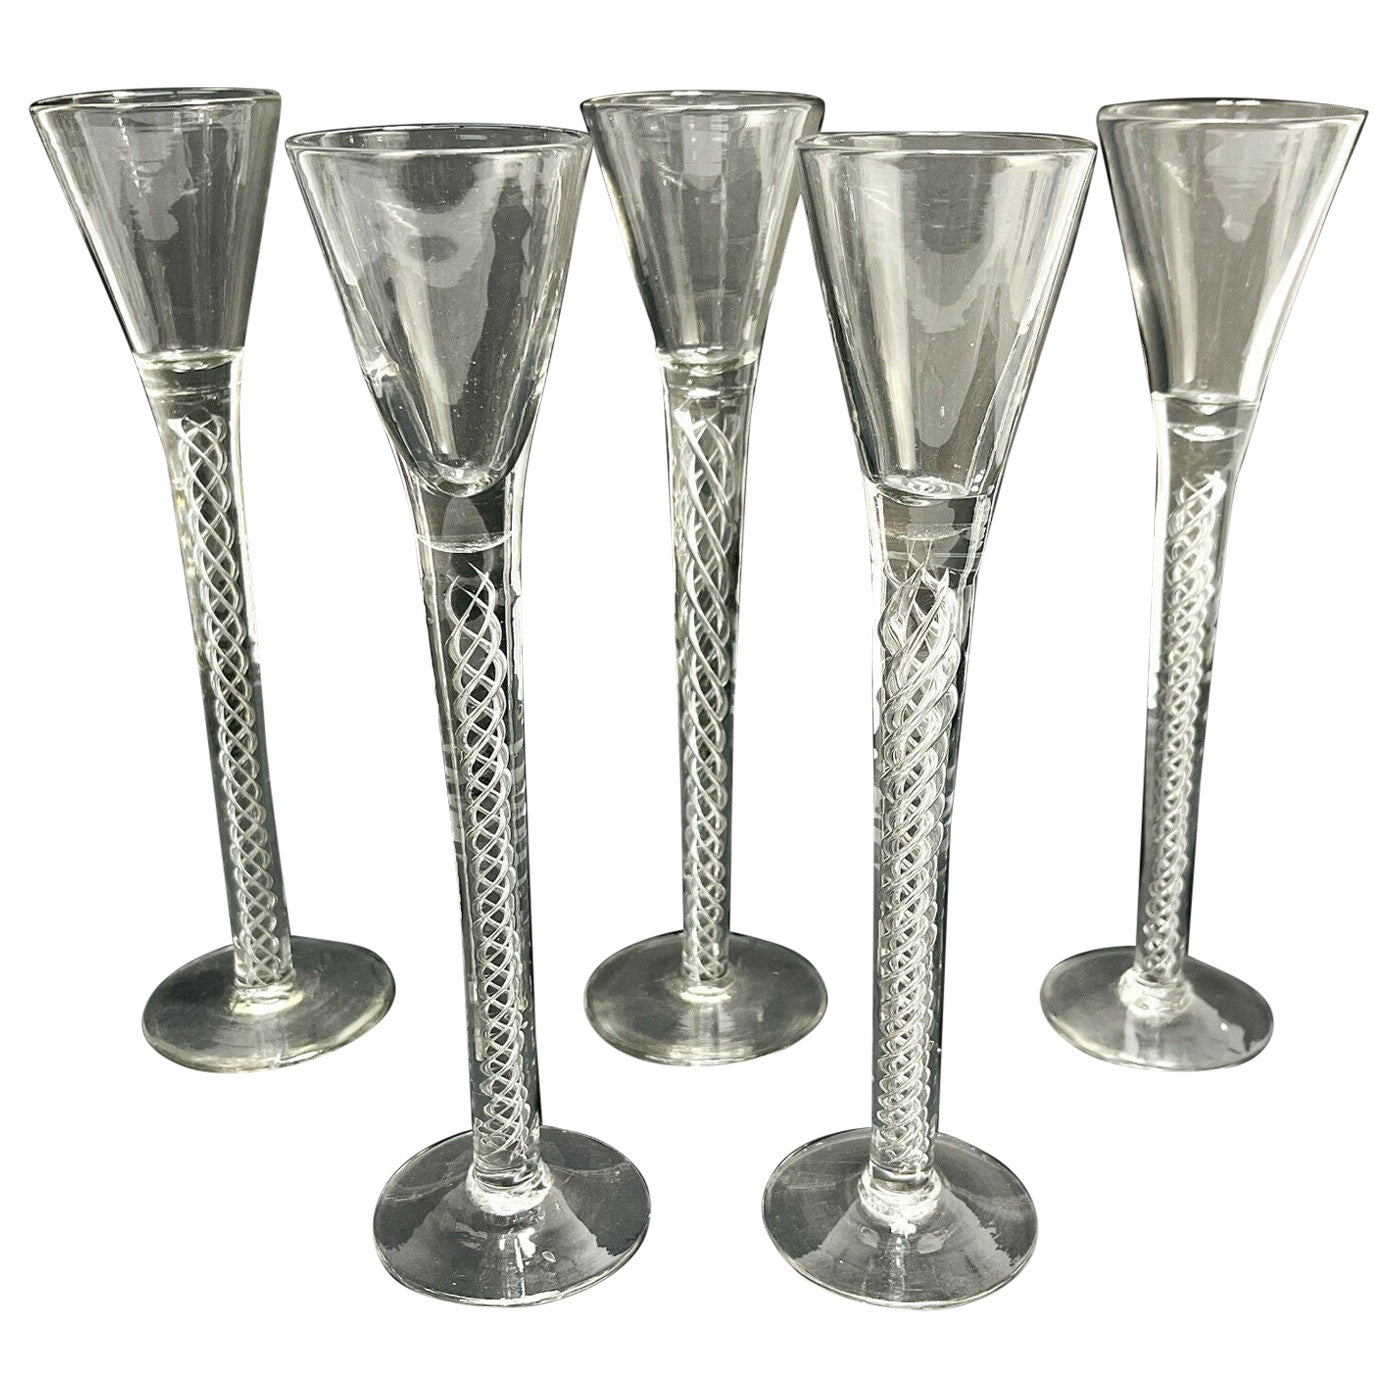 5 Victorian English Glass Wine Goblets, Air Twist Stems, 2nd Half 19th Century For Sale